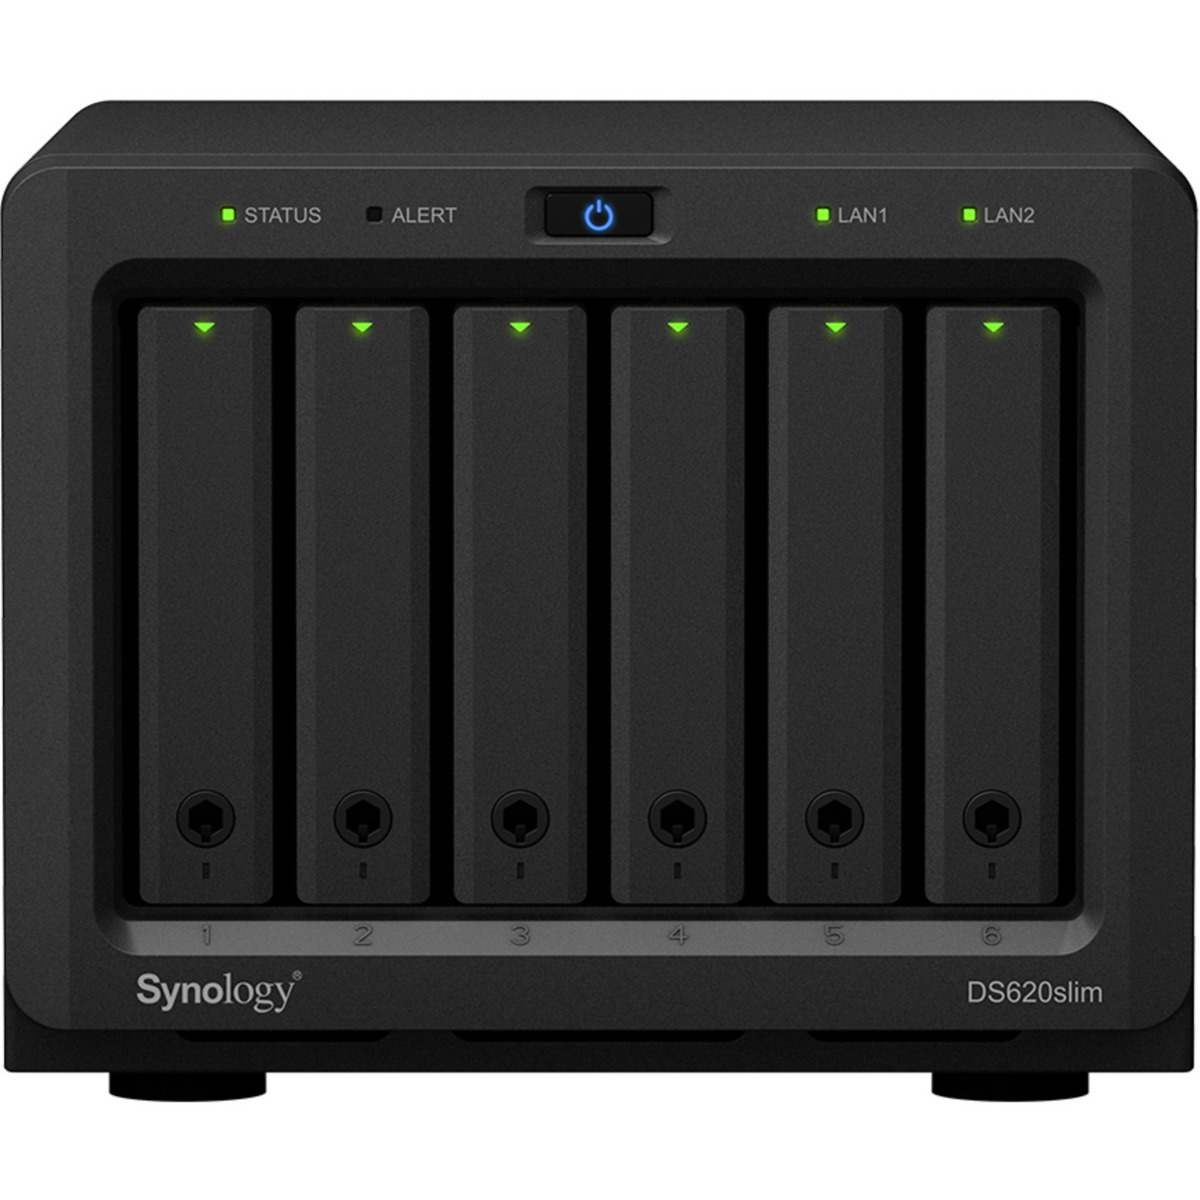 Synology DiskStation DS620slim 4tb 6-Bay Desktop Multimedia / Power User / Business NAS - Network Attached Storage Device 4x1tb Sandisk Ultra 3D SDSSDH3-1T00 2.5 560/520MB/s SATA 6Gb/s SSD CONSUMER Class Drives Installed - Burn-In Tested - FREE RAM UPGRADE DiskStation DS620slim